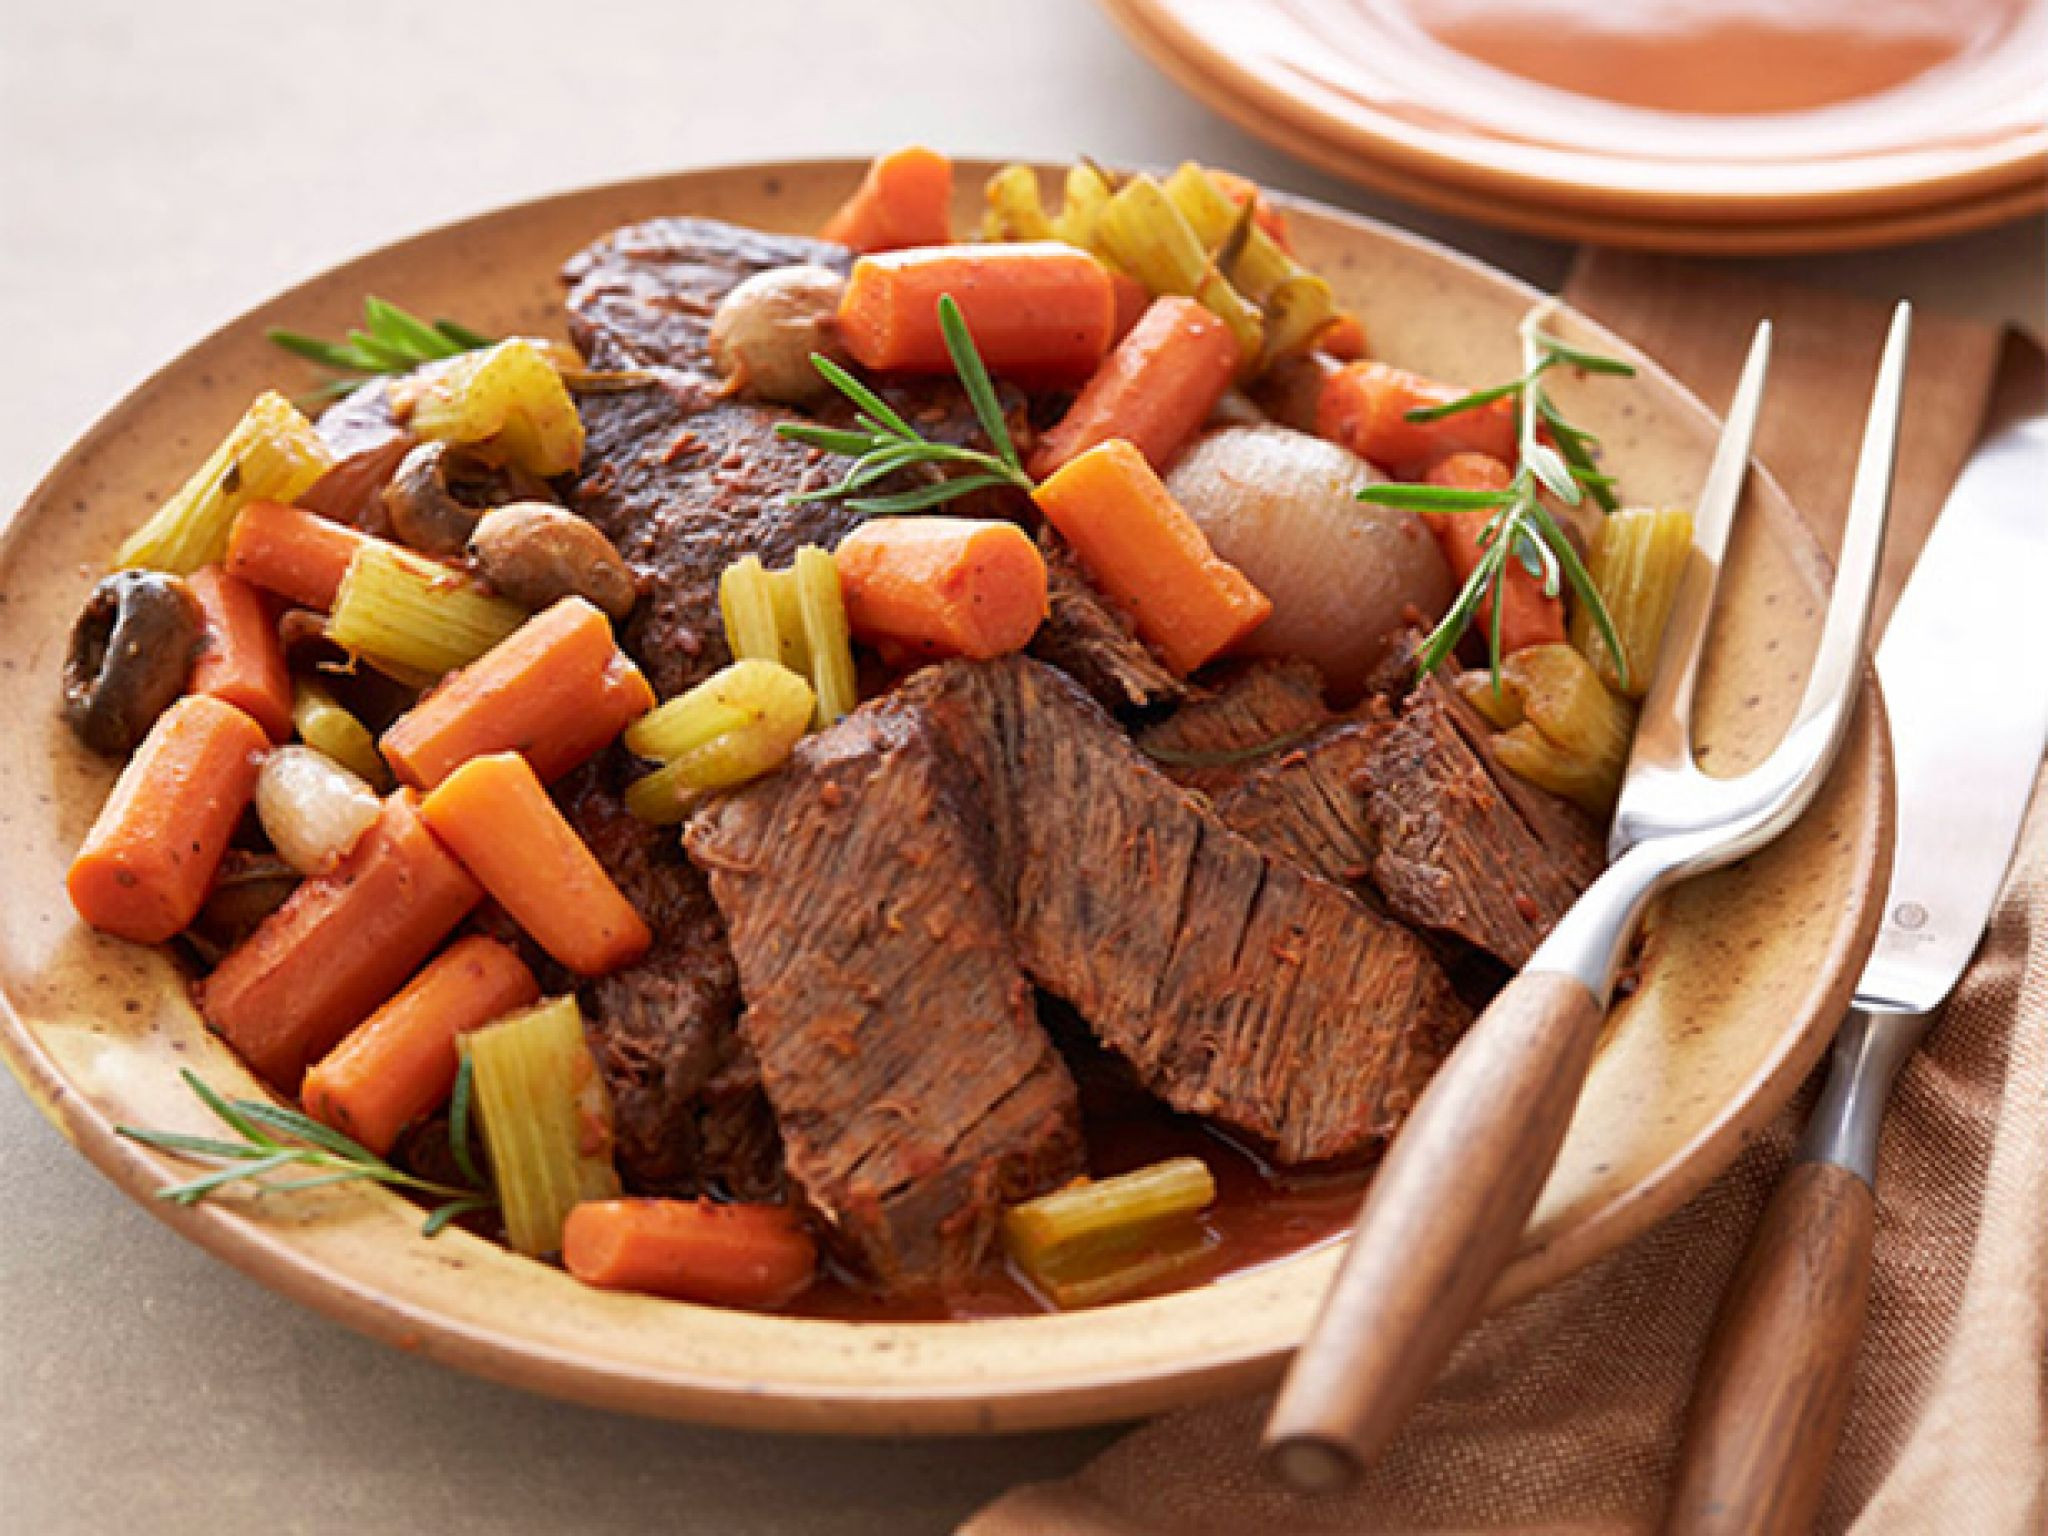 Roasted Vegetables Food Network
 Juicy Home Style Pot Roast with Roasted Ve ables Food